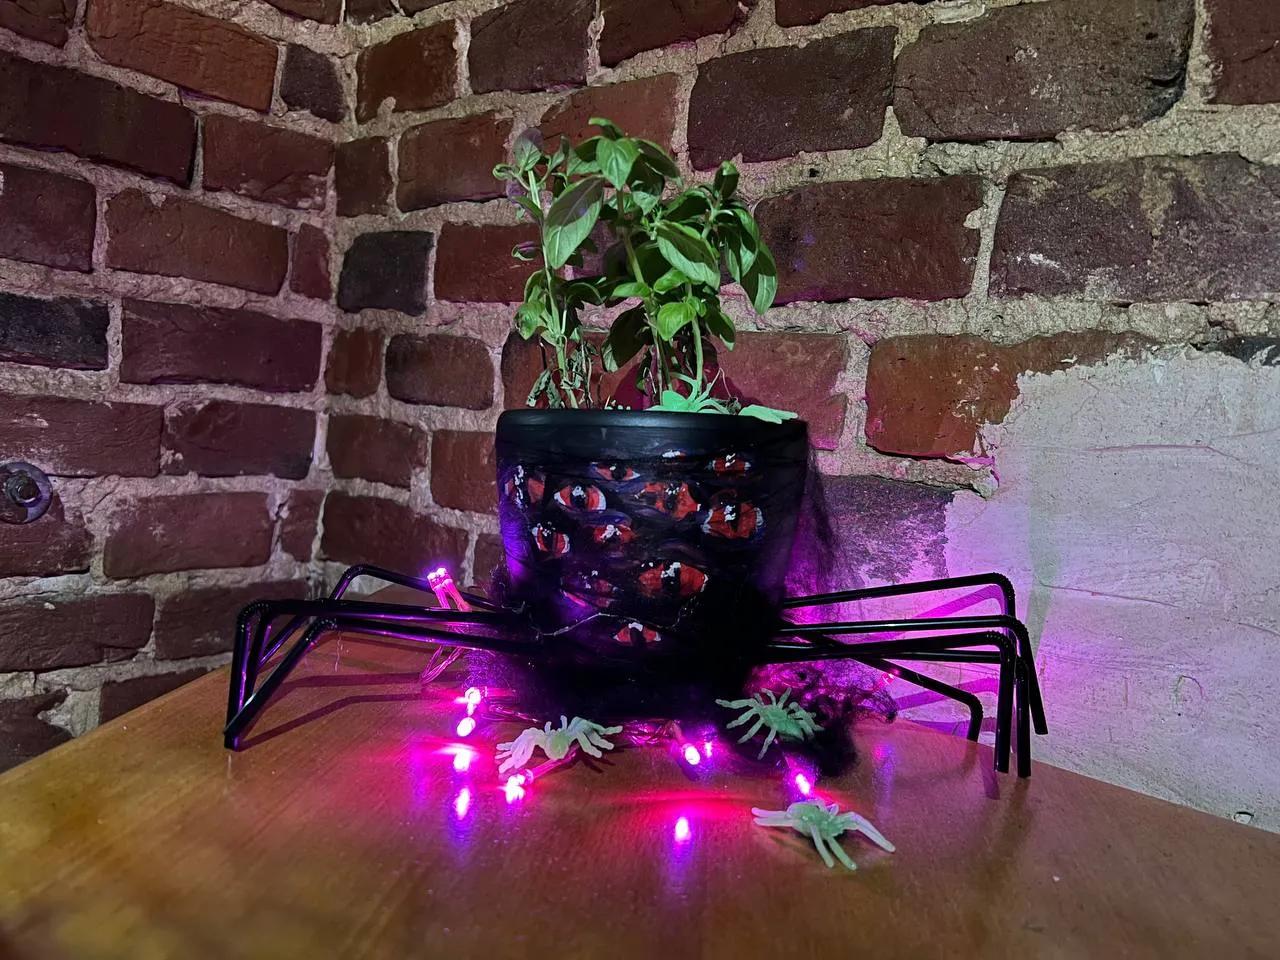 Pot with Spider Legs